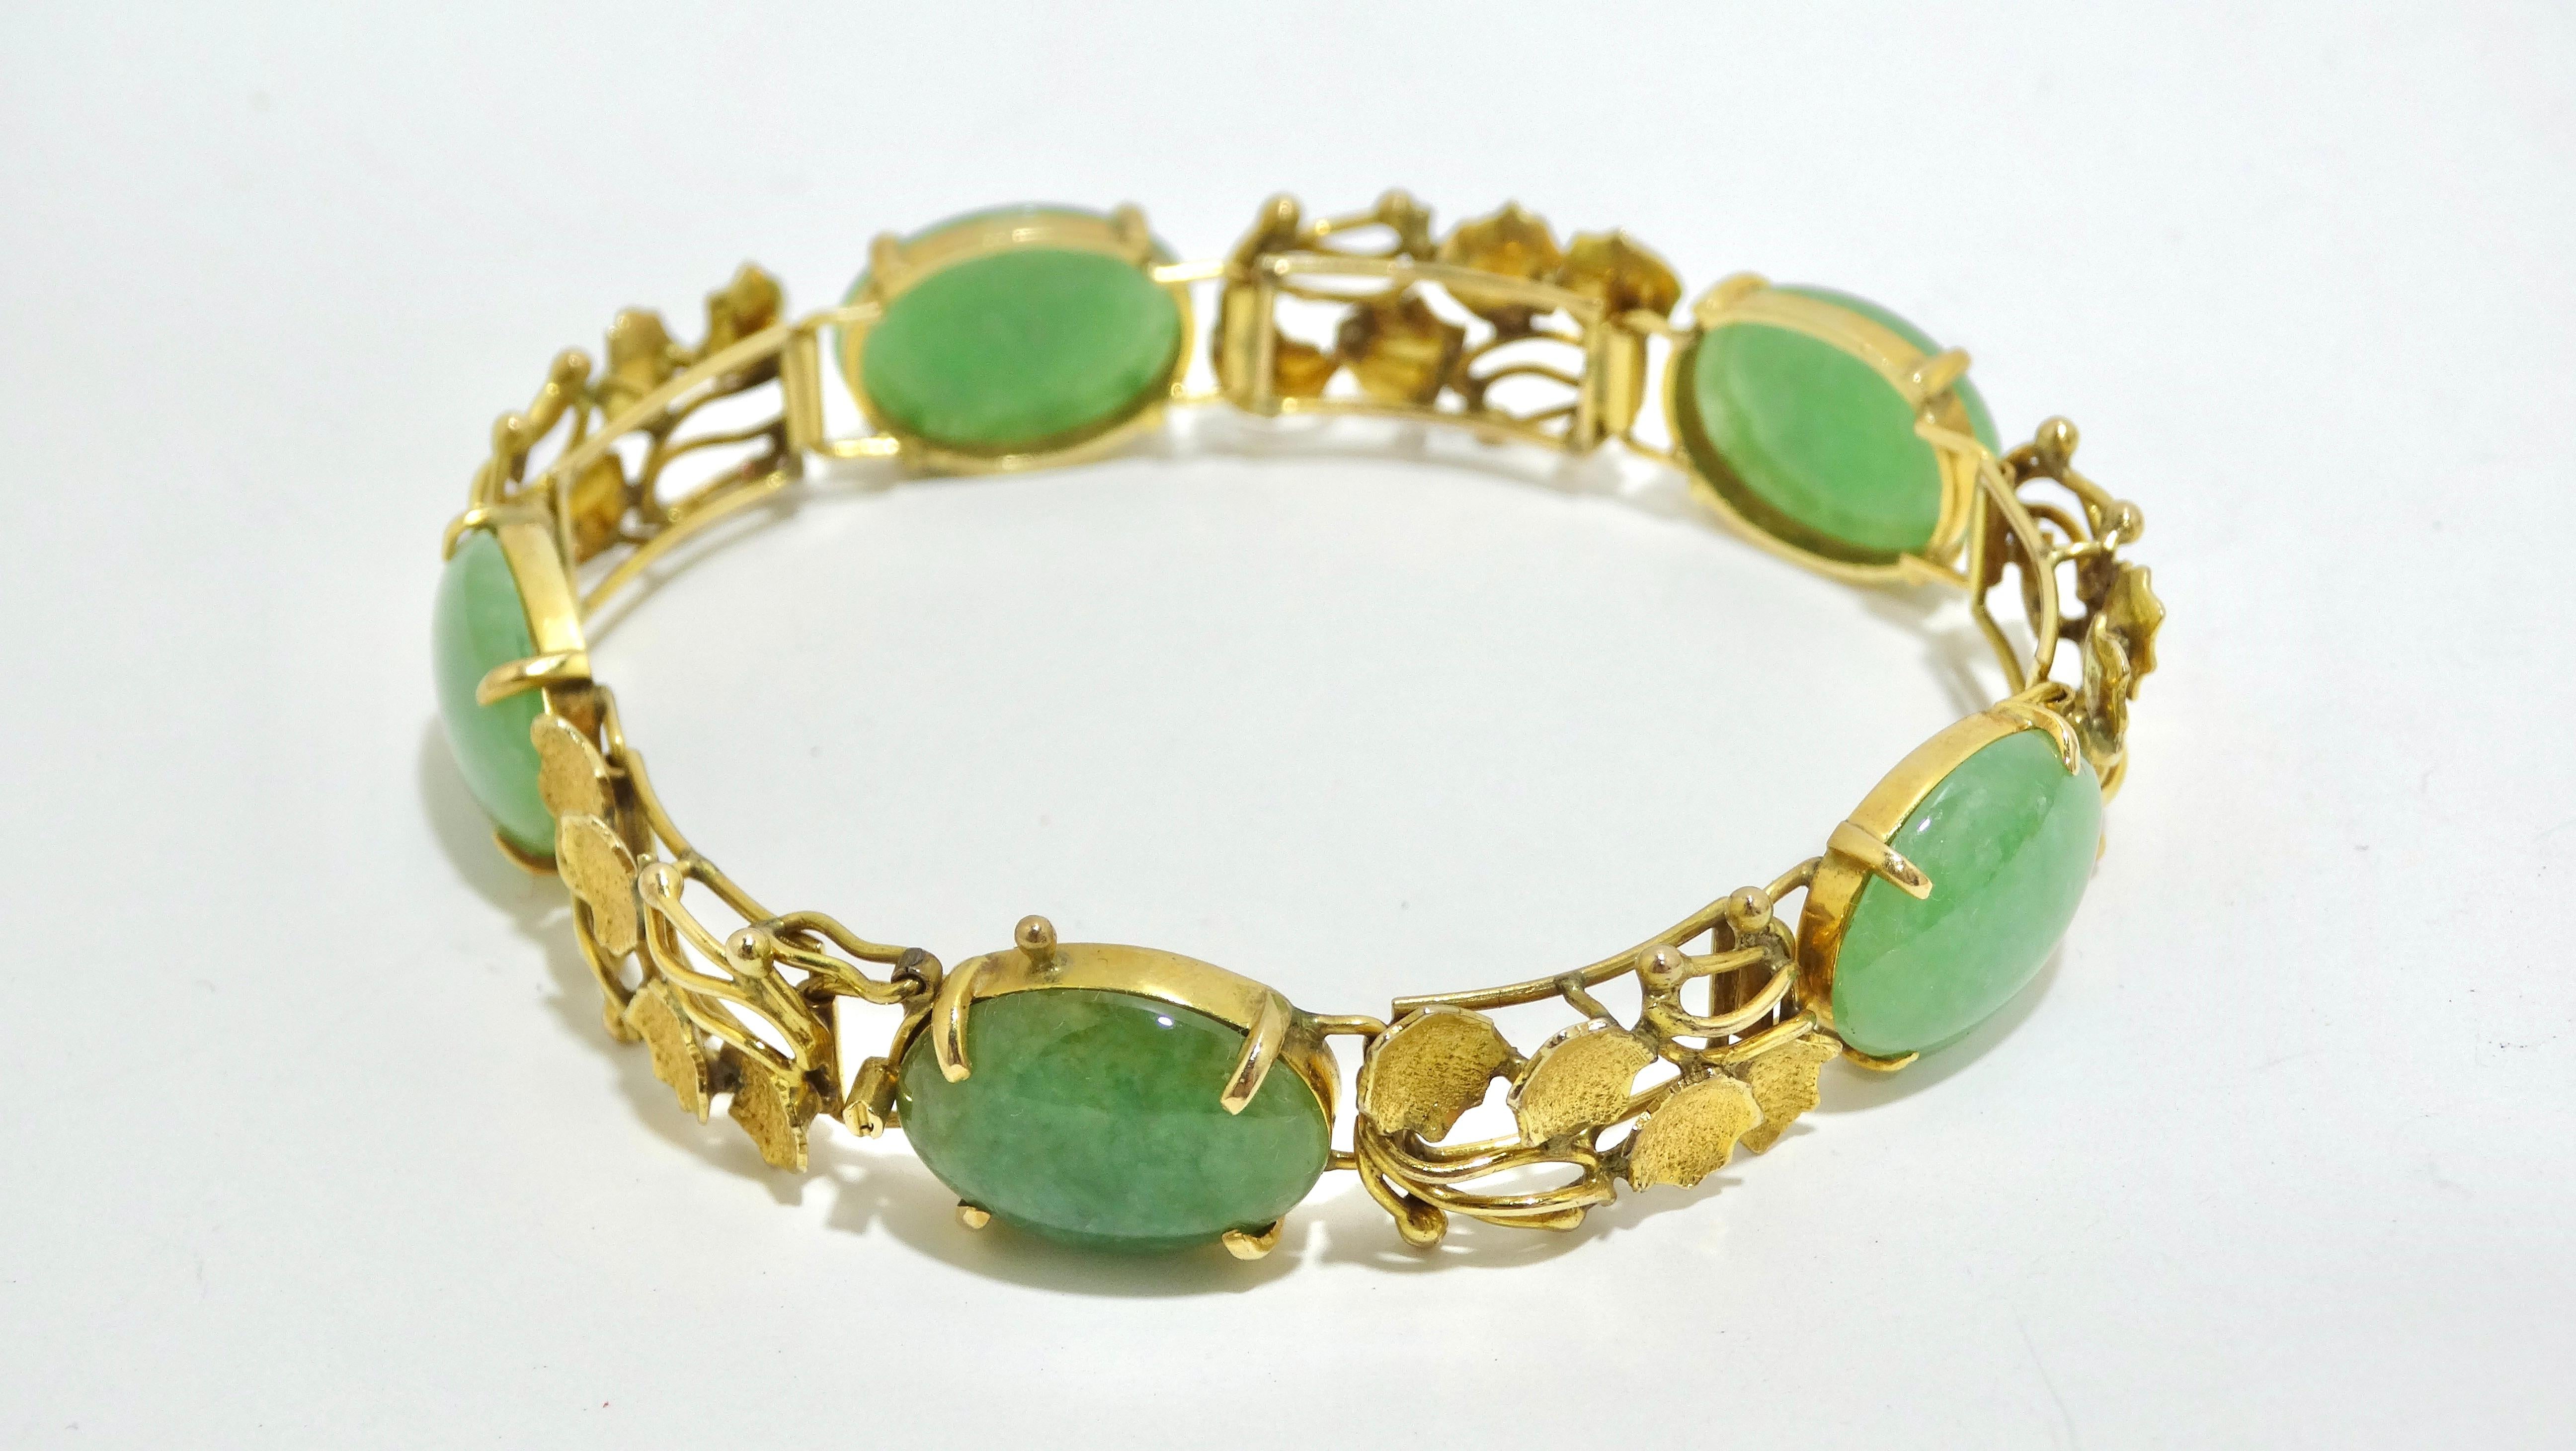 This bracelet has an undeniable beauty to it. This bracelet included 5 oval-cut jade stones surrounded by ornate and delicate leaf detailing in 14k gold. The jade stone is often times referred to as the stone of luck and happiness. Jade is known to